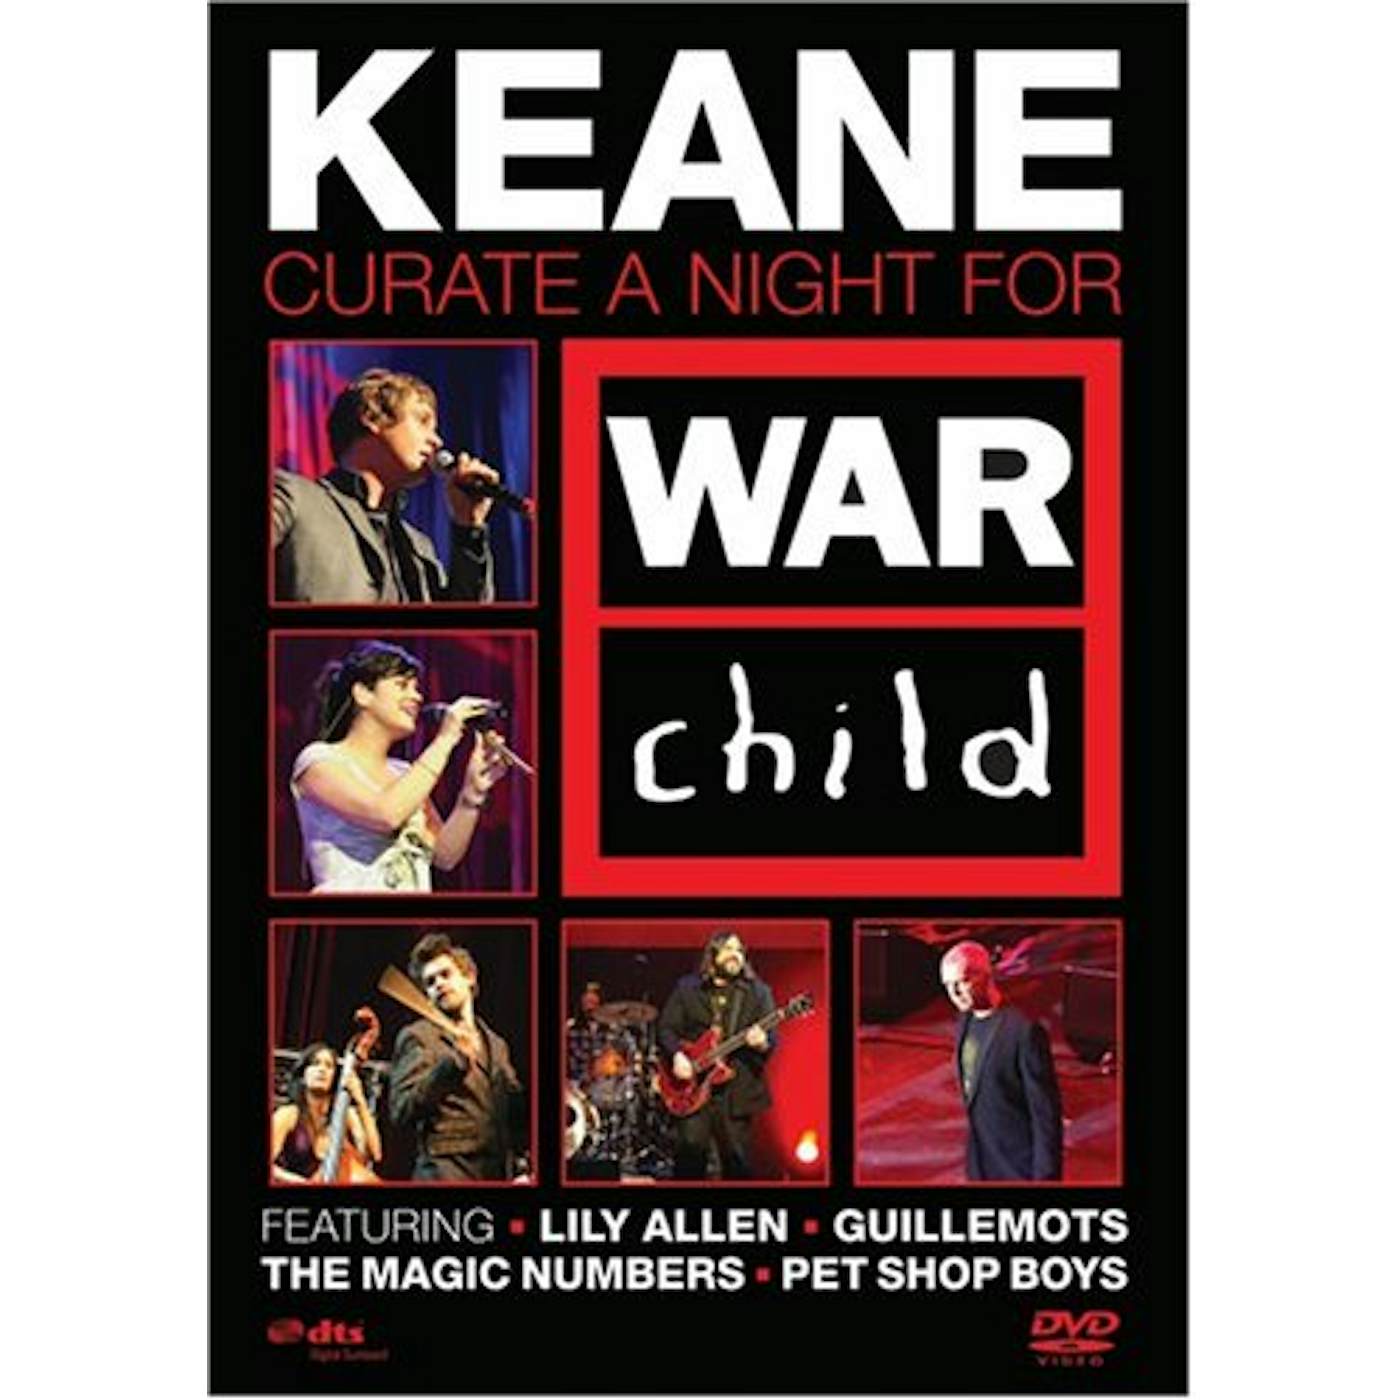 Keane CURATE A NIGHT FOR WAR CHILD DVD